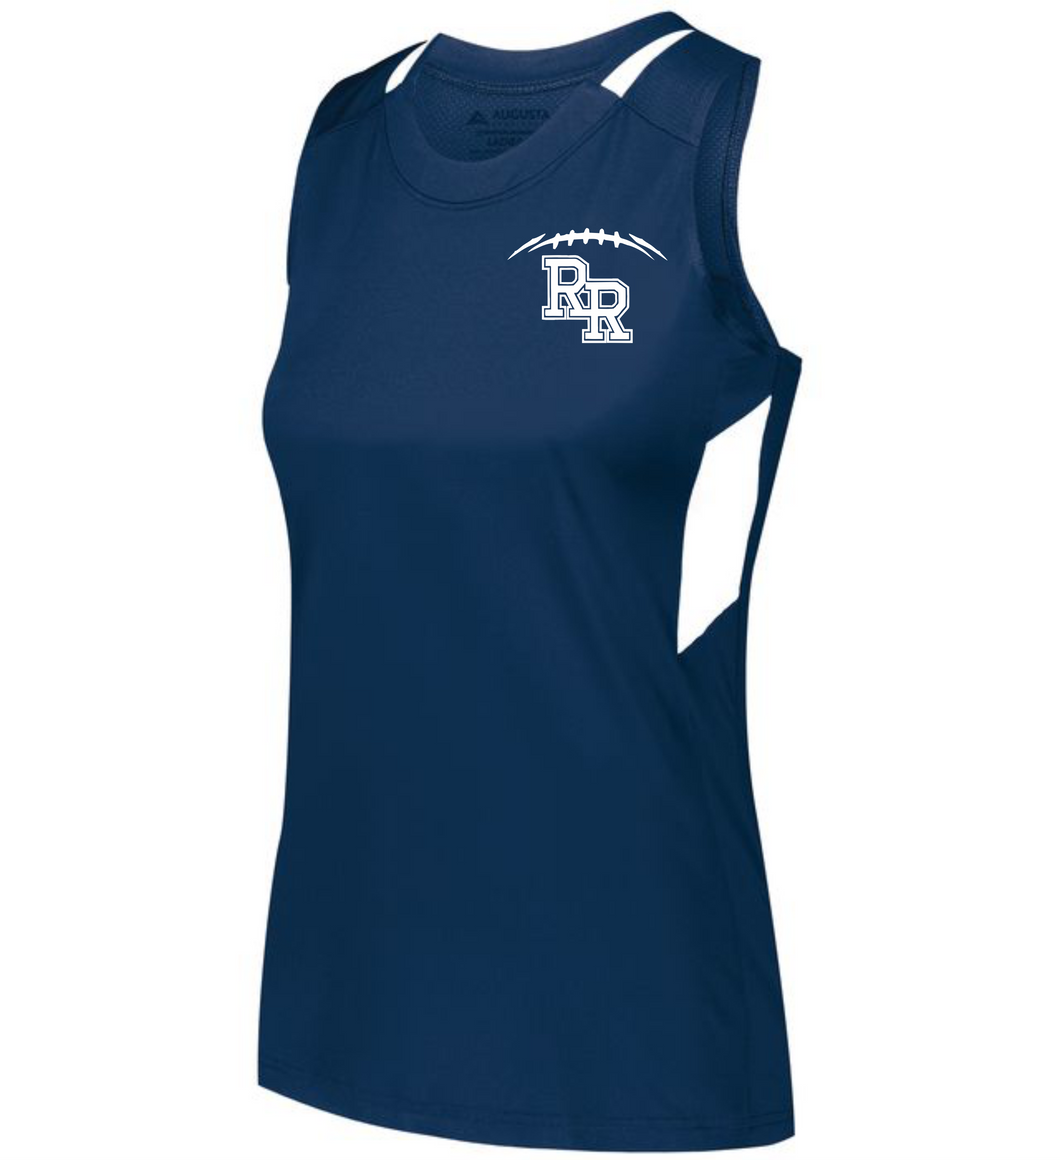 RR-FB-522-9 - Augusta Ladies Crossover Tank - Laces & KNIGHT Back Logo